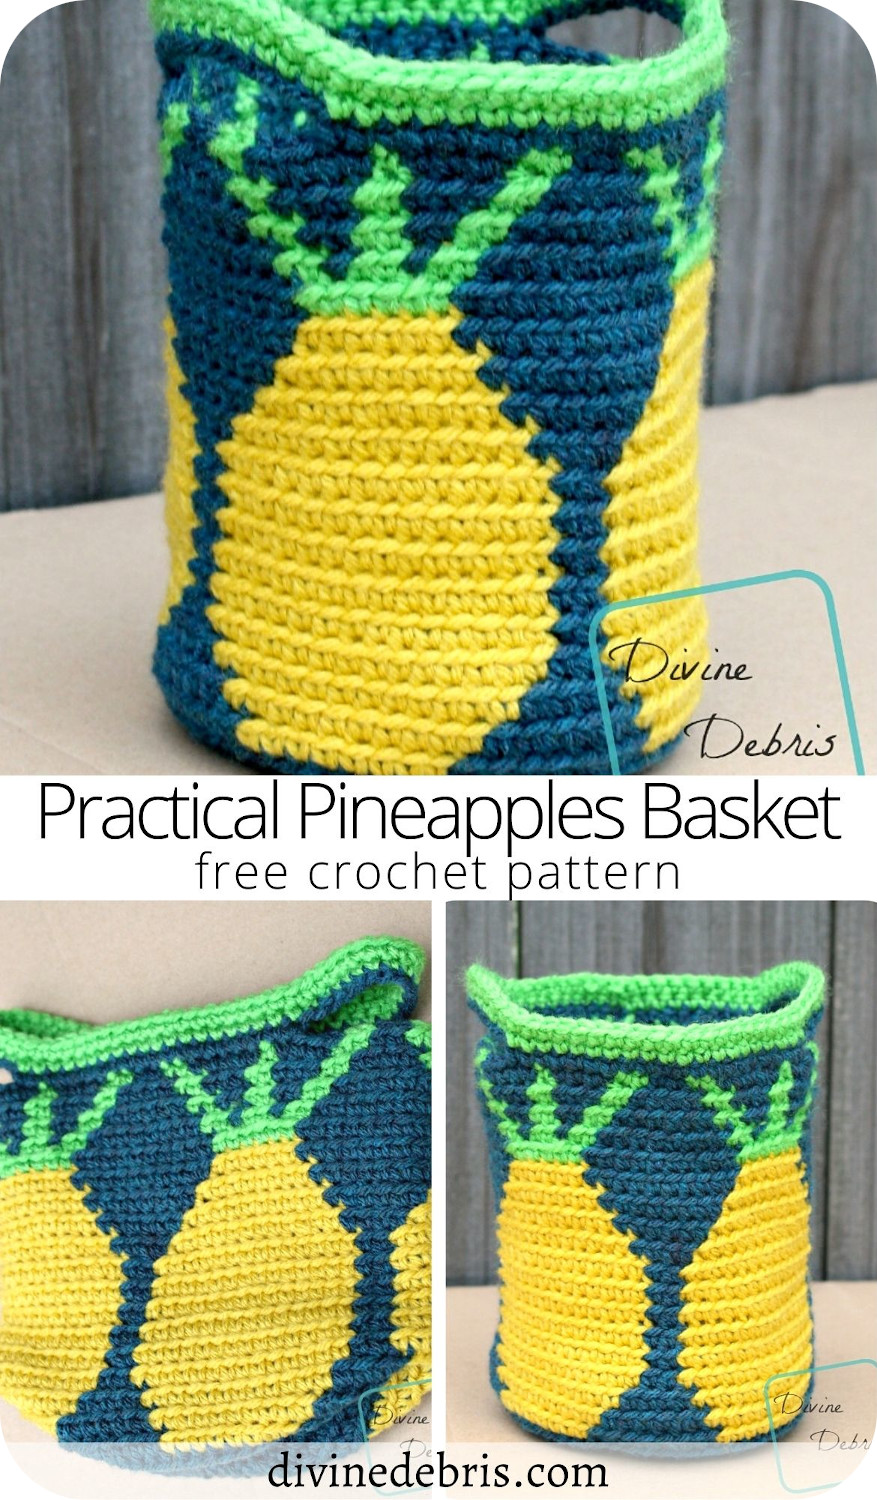 Learn to make the fun and cute tapestry crochet pattern, the Practical Pineapples Basket from a free crochet pattern by Divine Debris